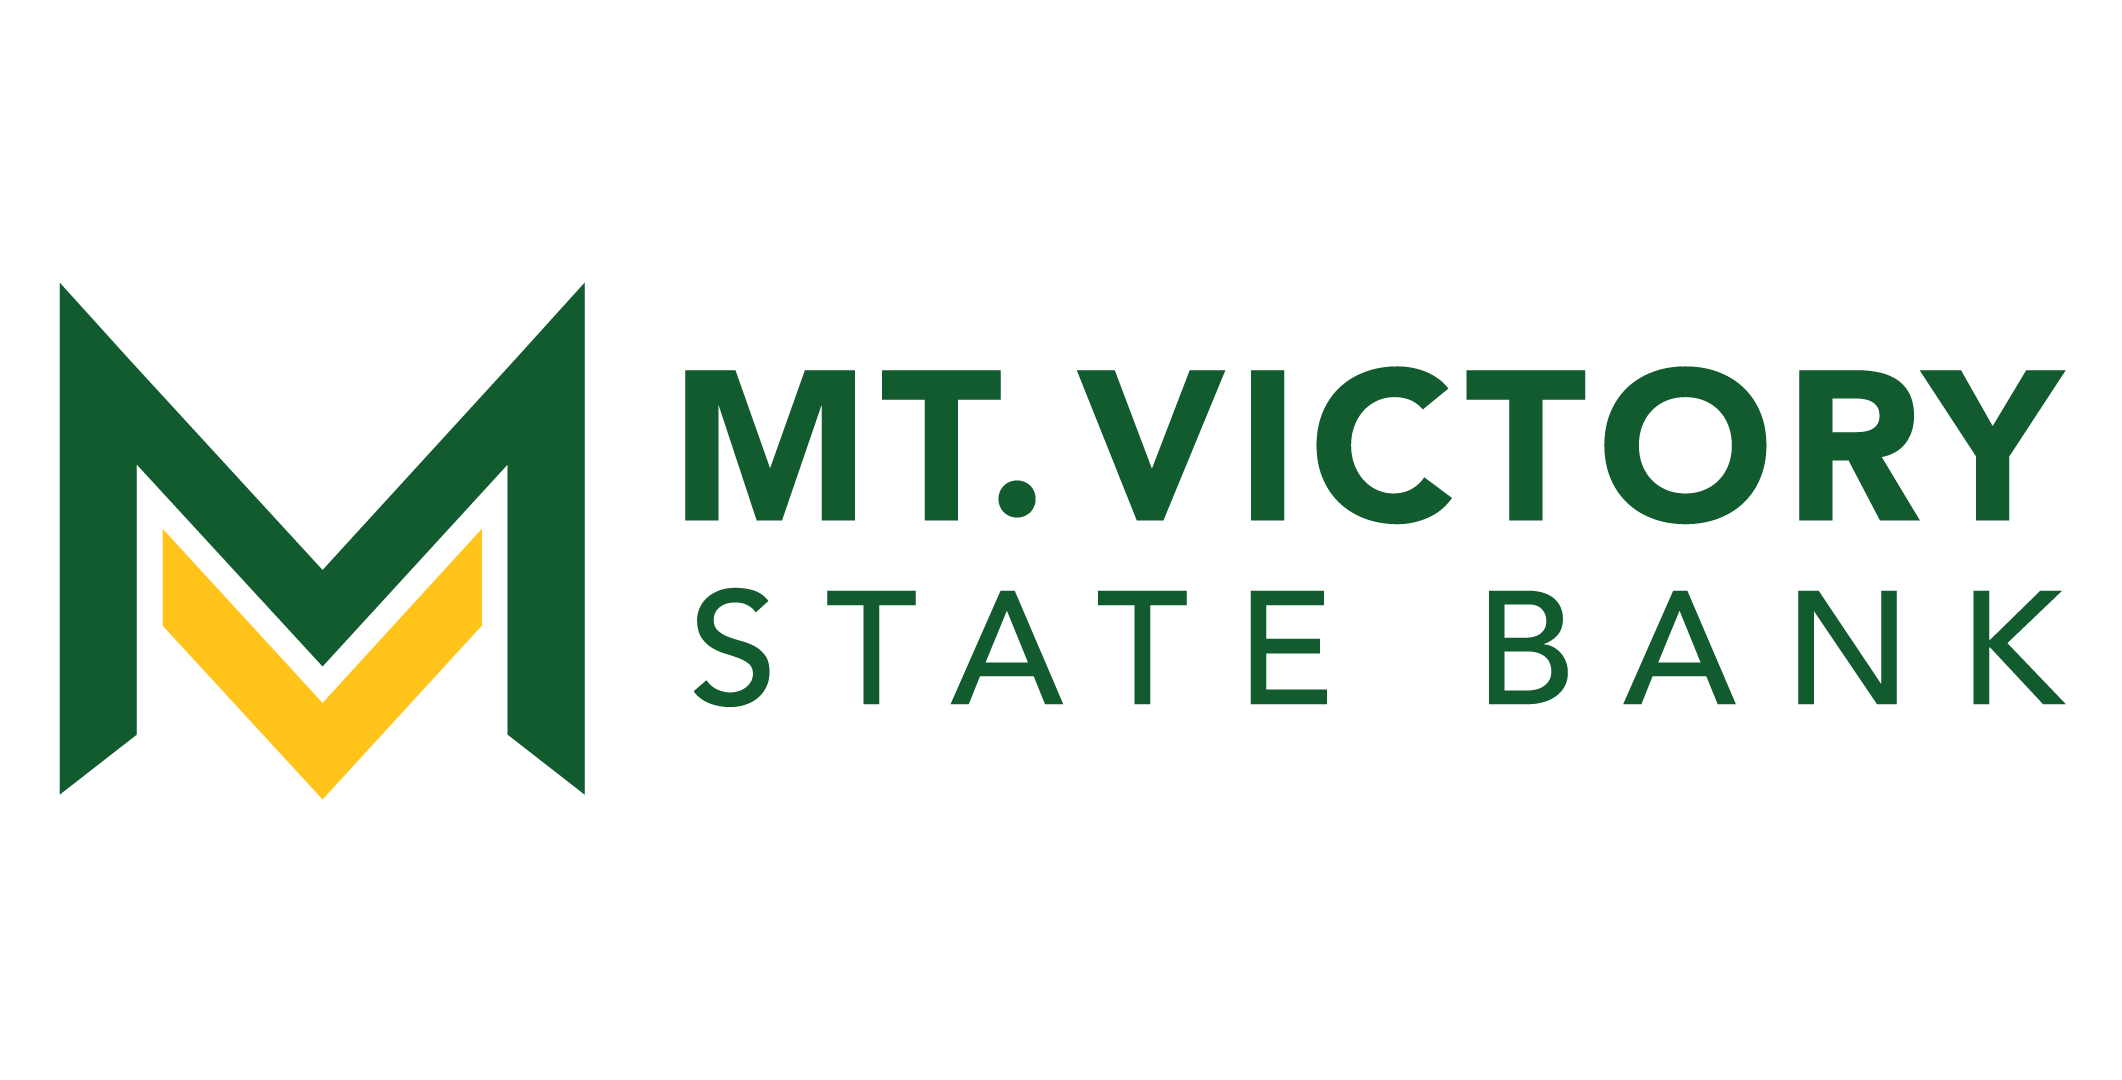 The Mt. Victory State Bank